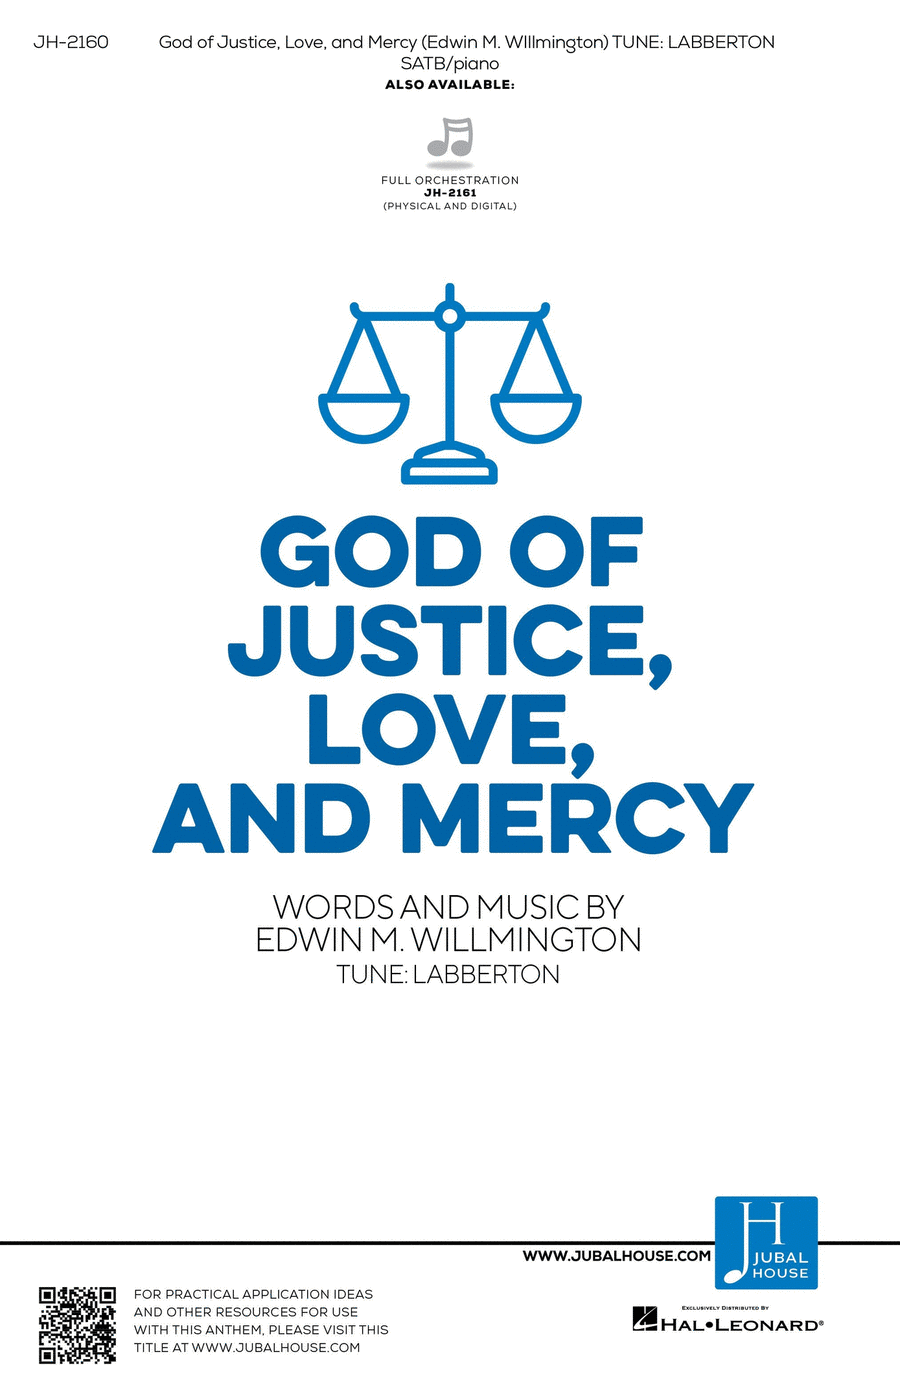 God of Justice, Love, and Mercy